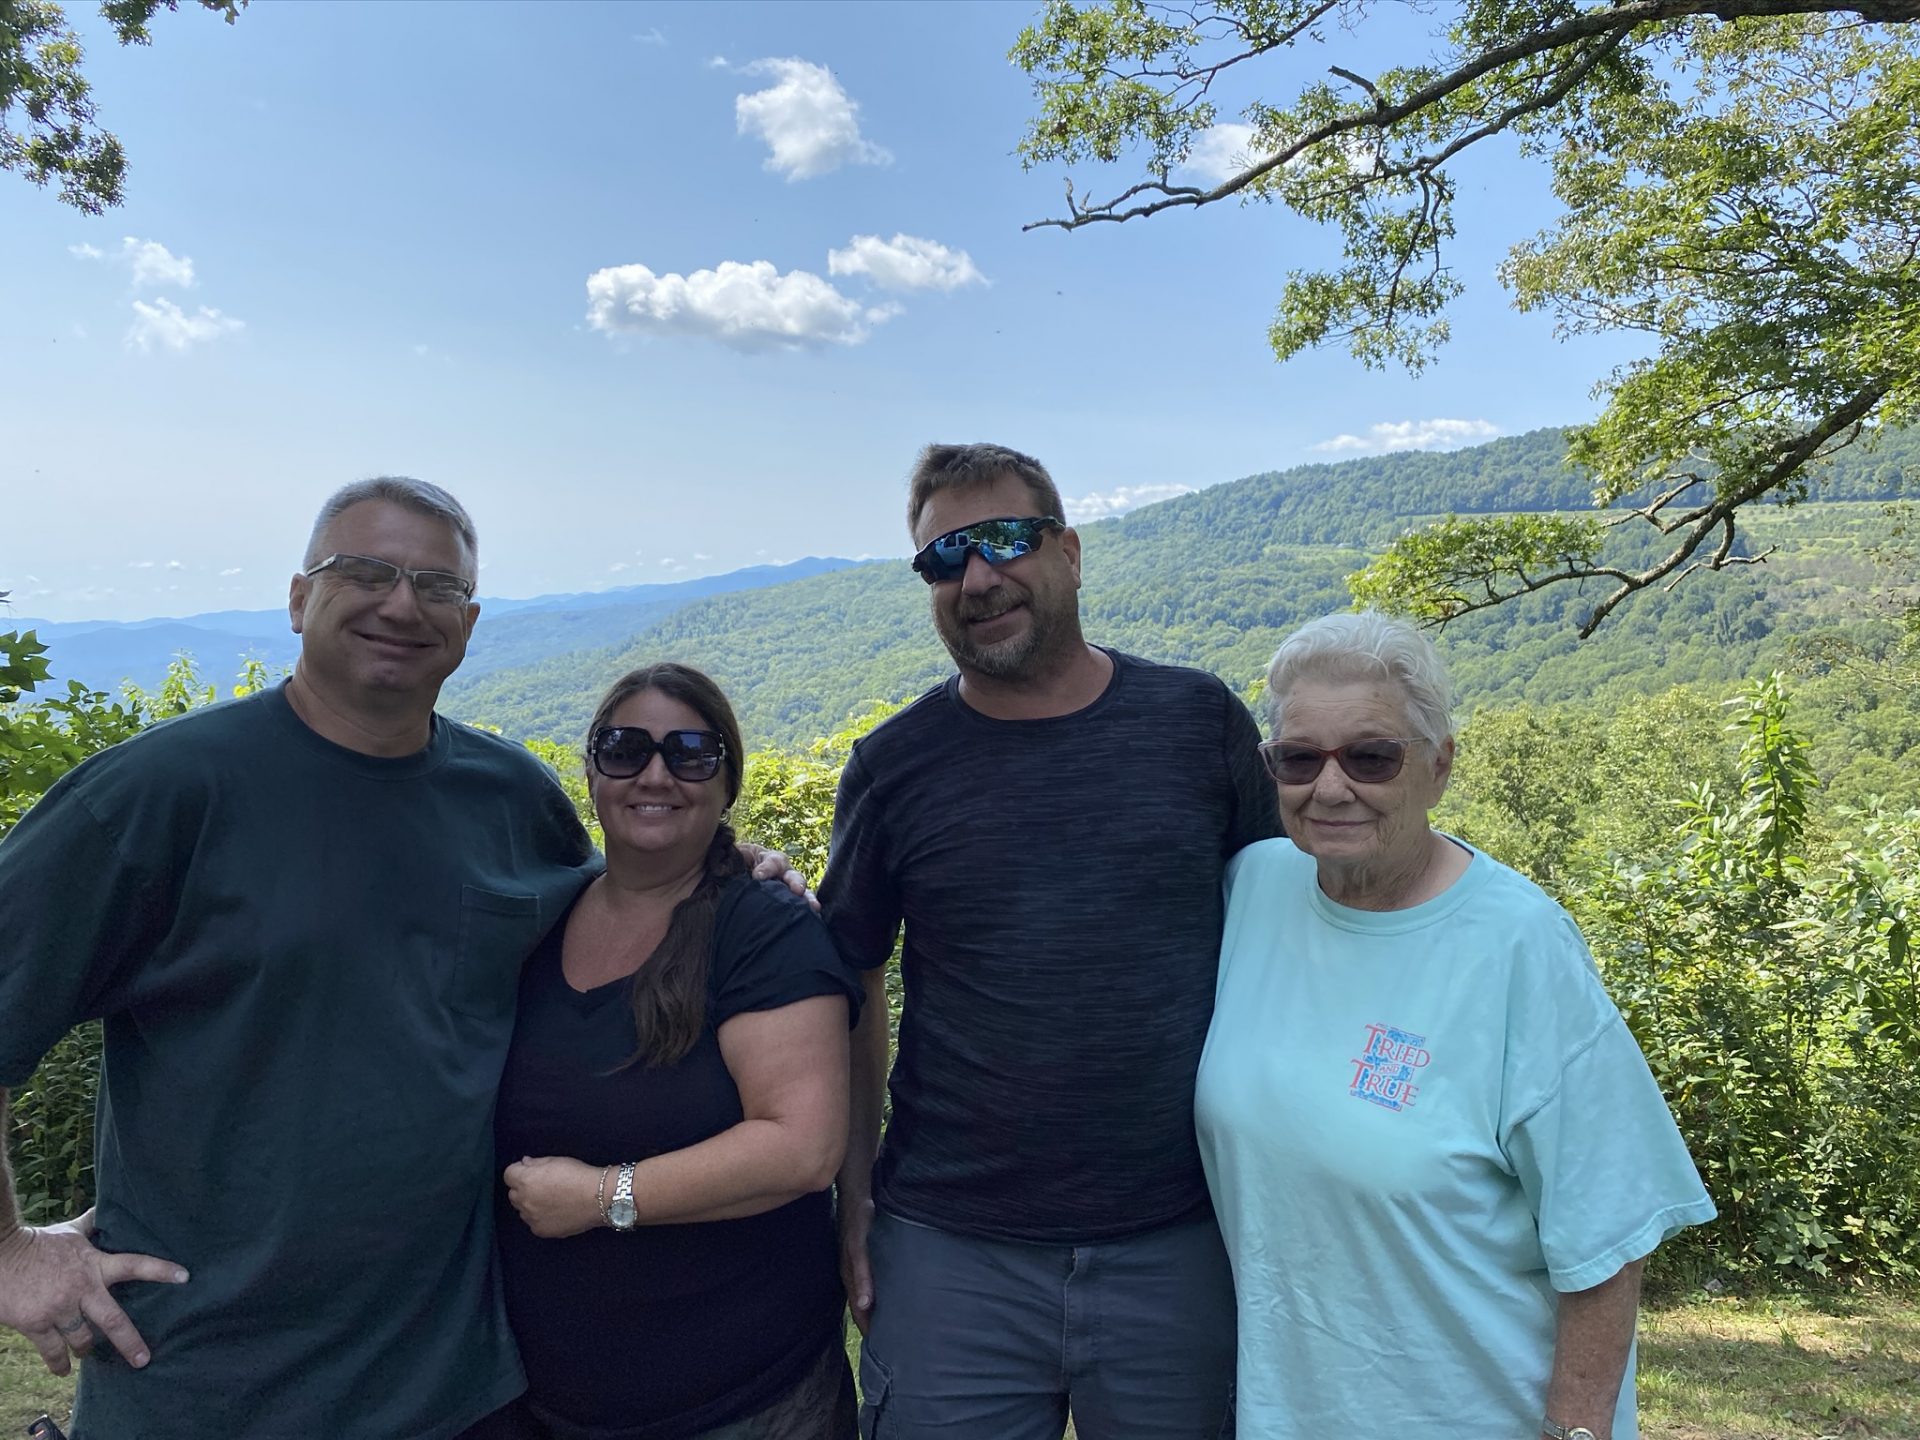 Michael, Tanya, Joe and Mom up in North Carolina. Last picture of everyone together. Joe and I will miss you Michael. Until we meet again. All our Love! ❤️